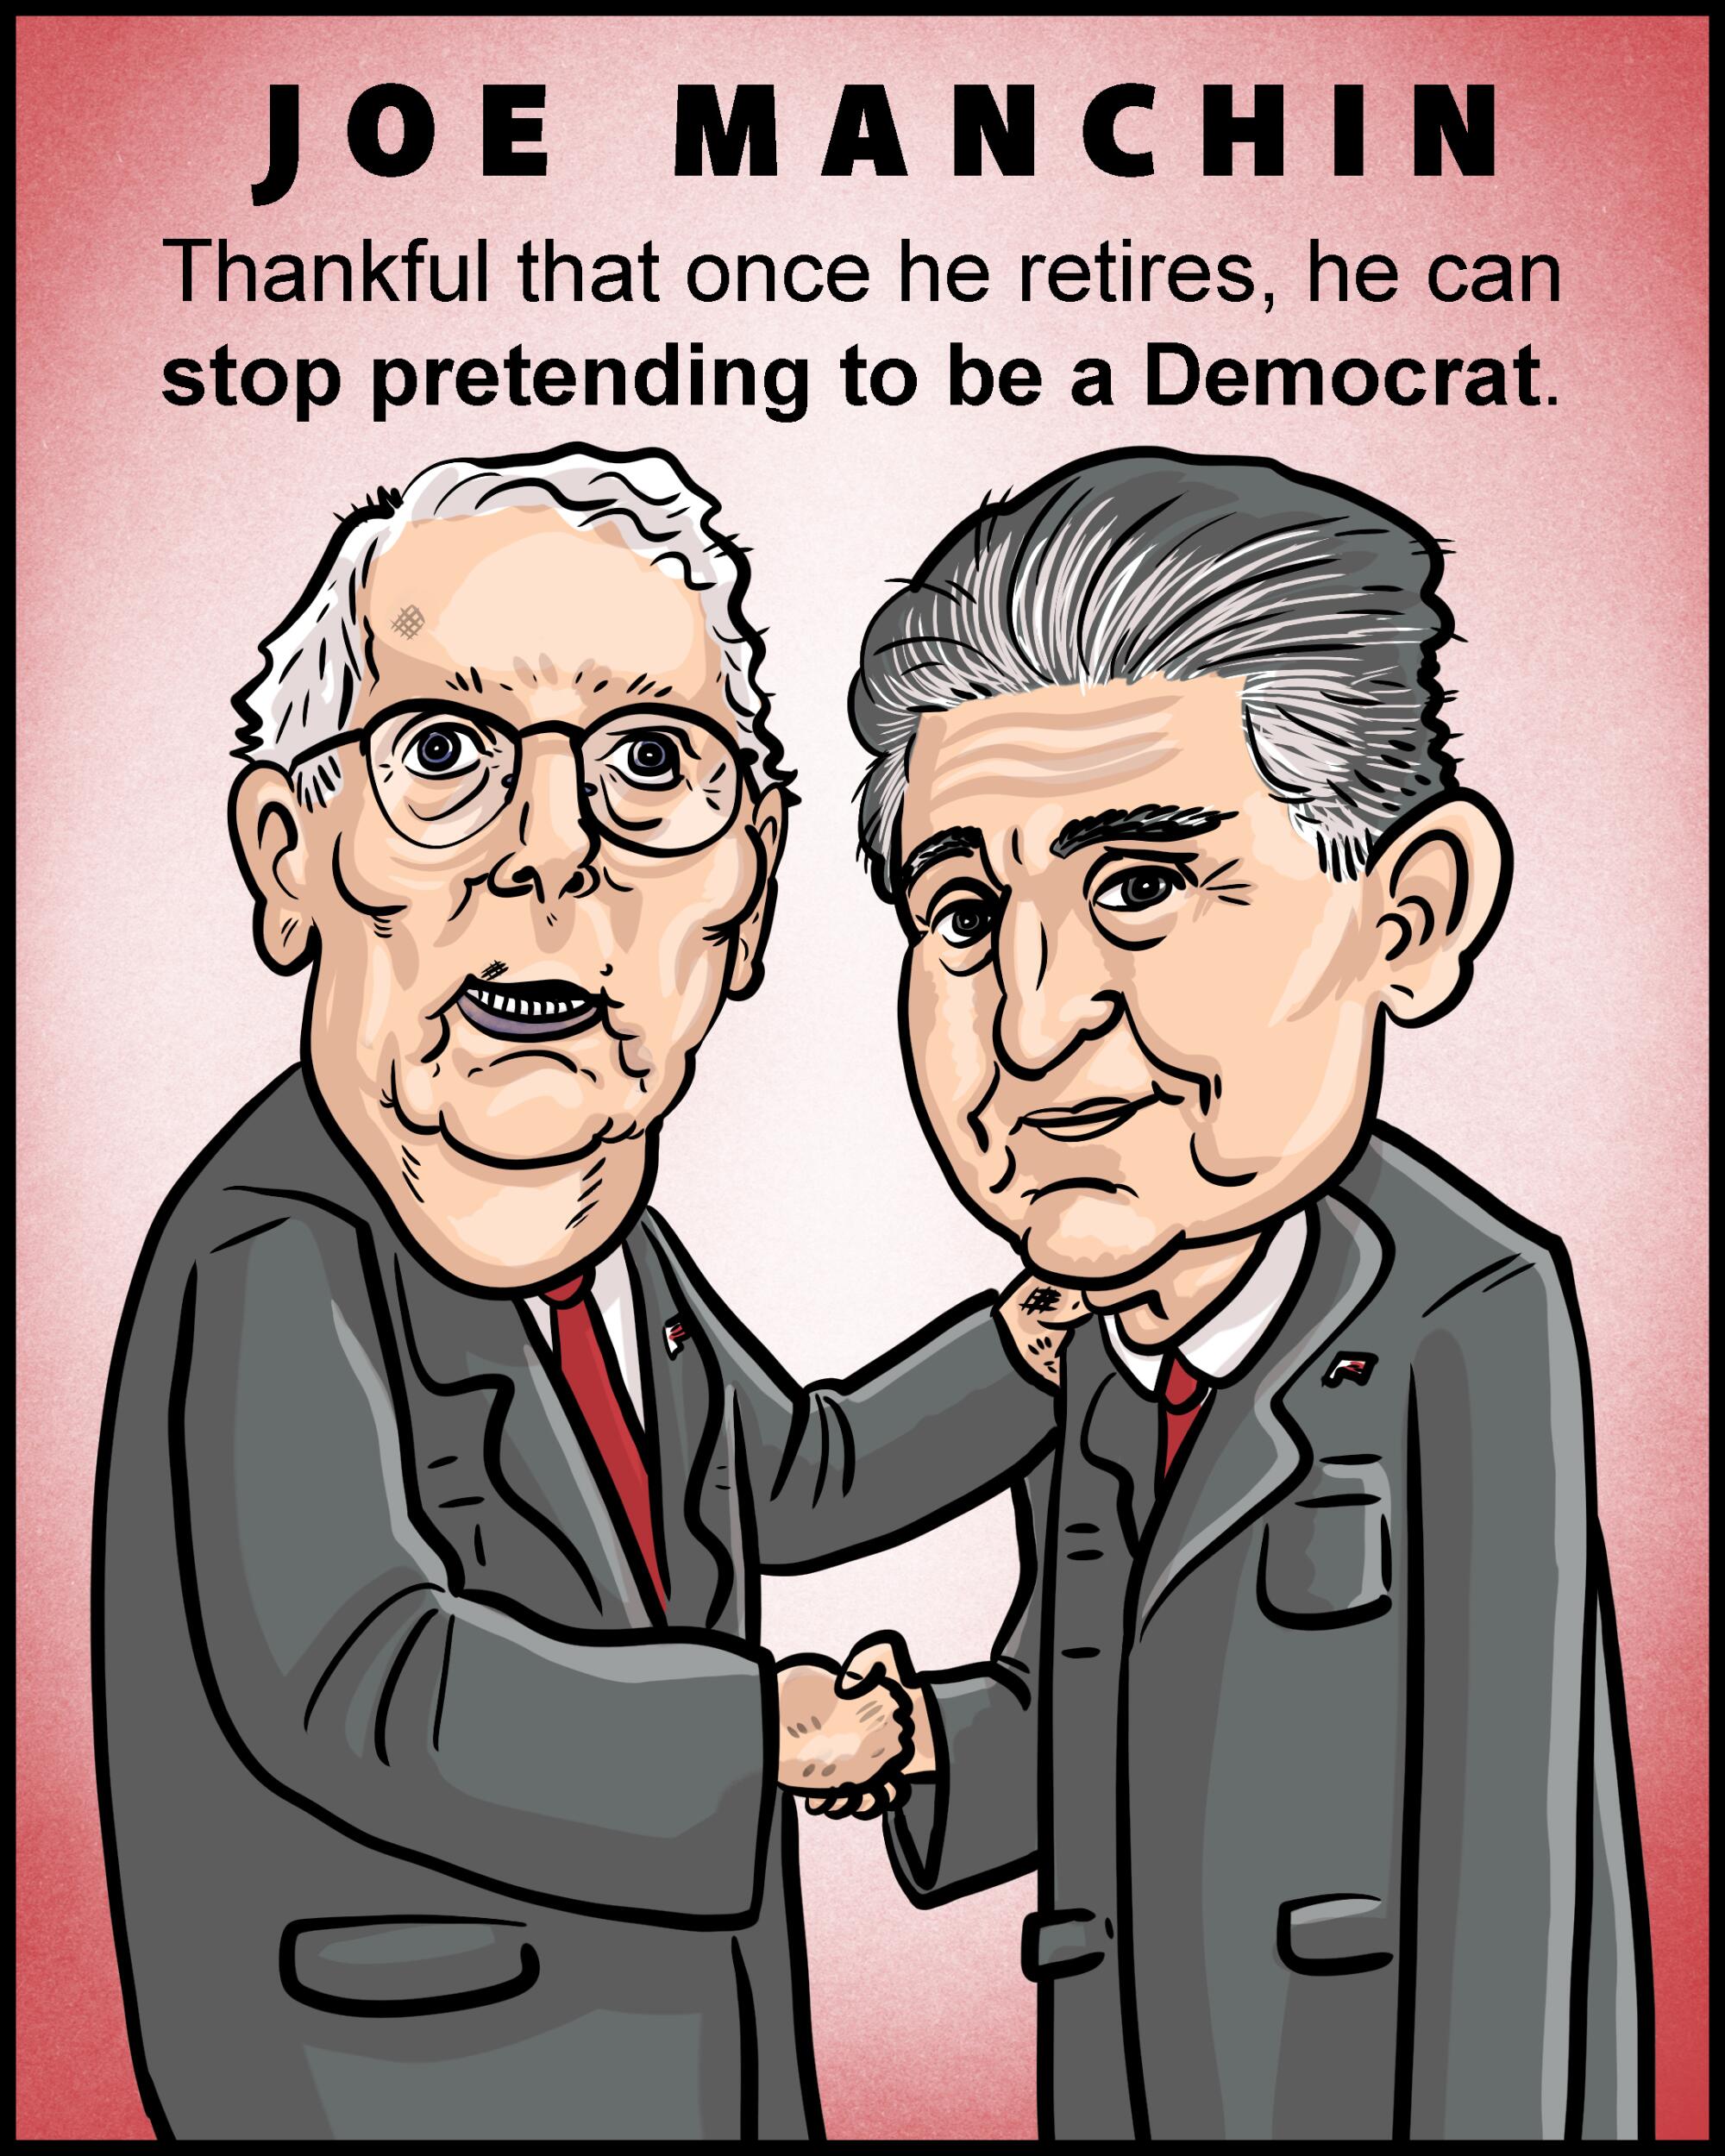 Joe Manchin - Thankful that once he retires, he can stop pretending to be a Democrat